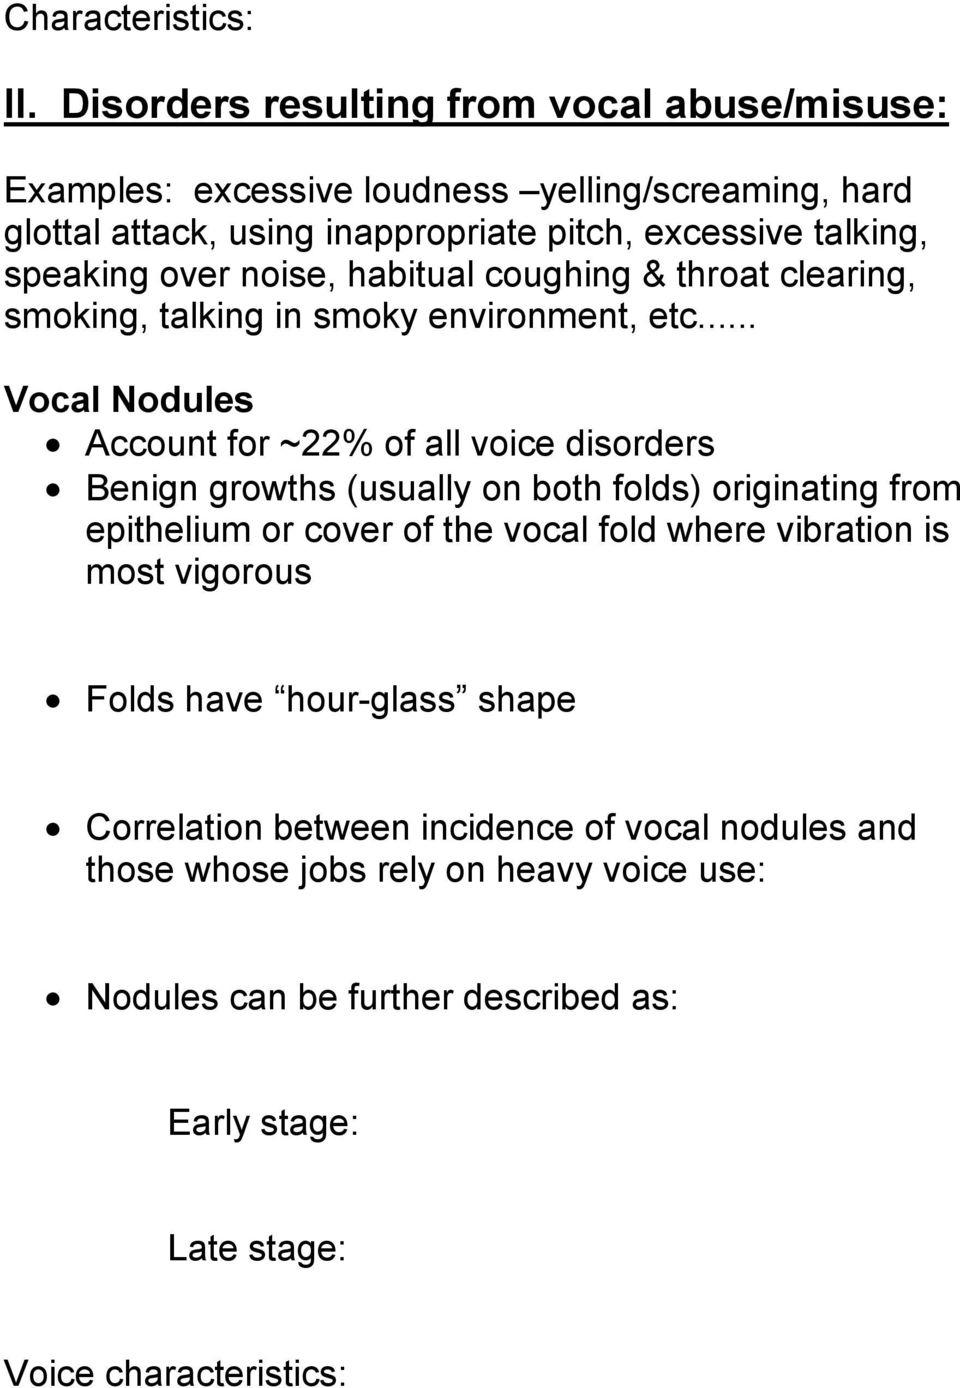 speaking over noise, habitual coughing & throat clearing, smoking, talking in smoky environment, etc.